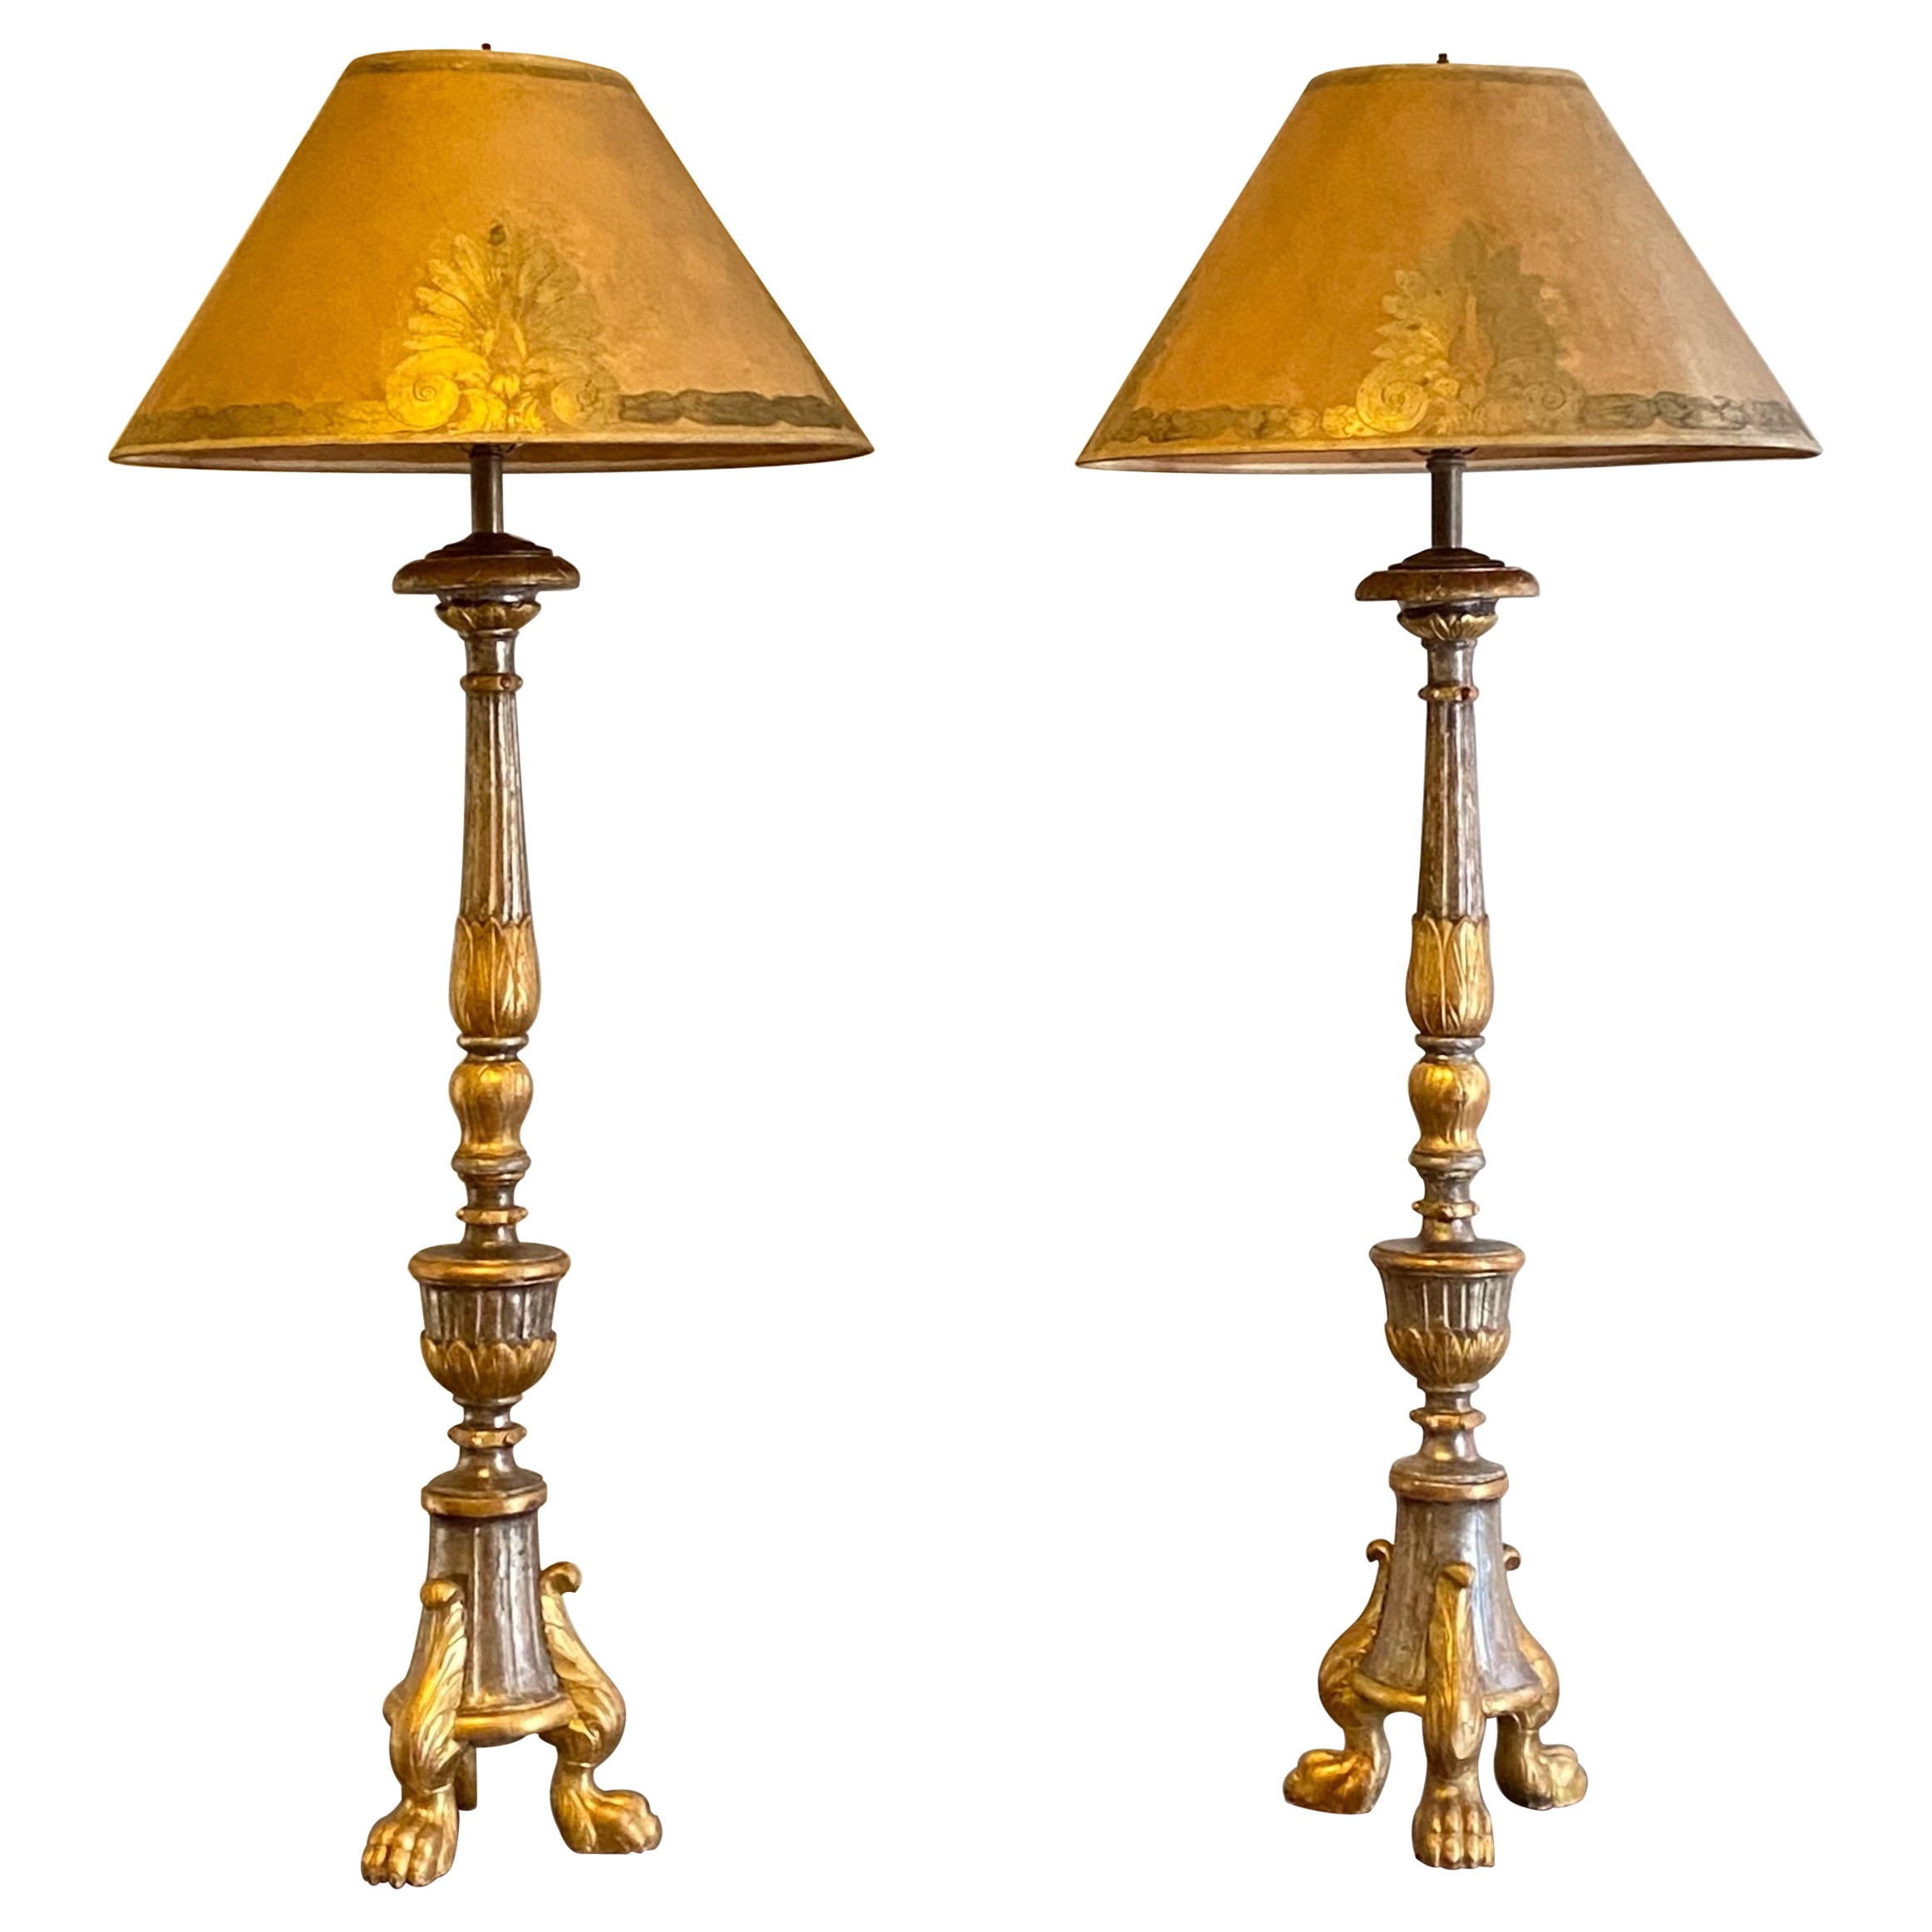 Tall 18th Century Continental Silvered and Gilt Candle Stand Lamps